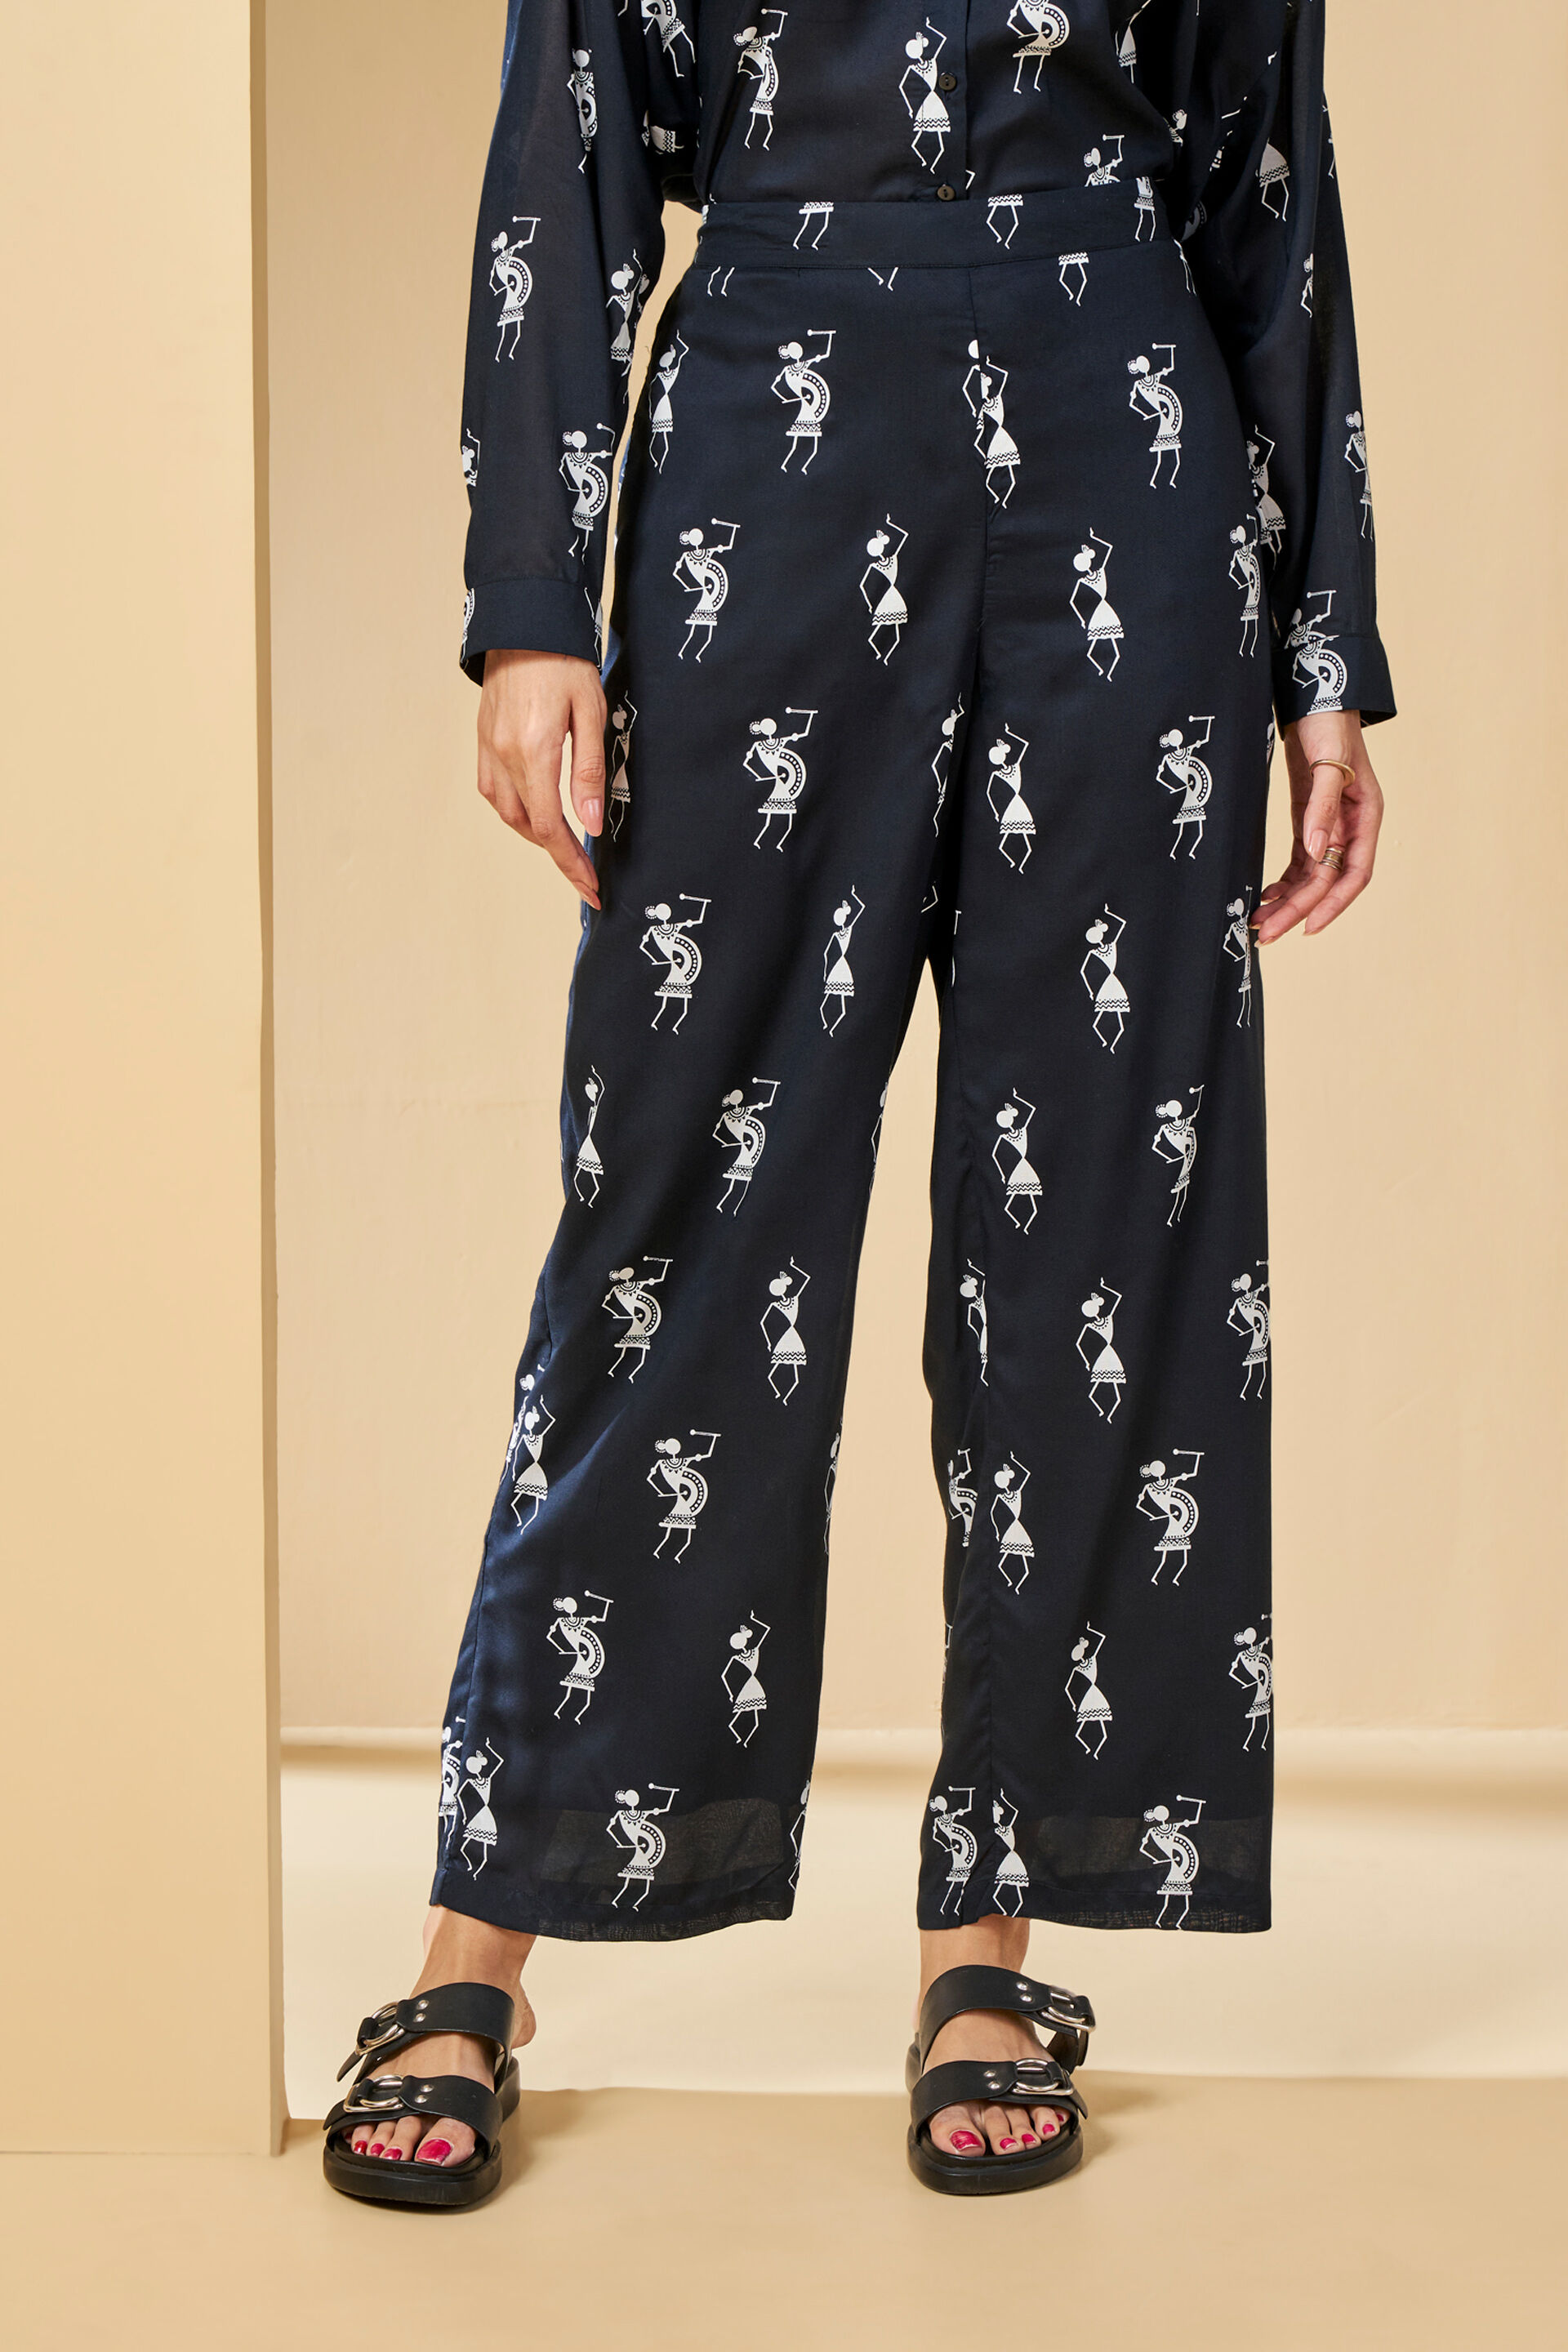 Soft MOSS Hi Fashion Knotted Printed Ladies Pant at Rs 300/piece in Noida